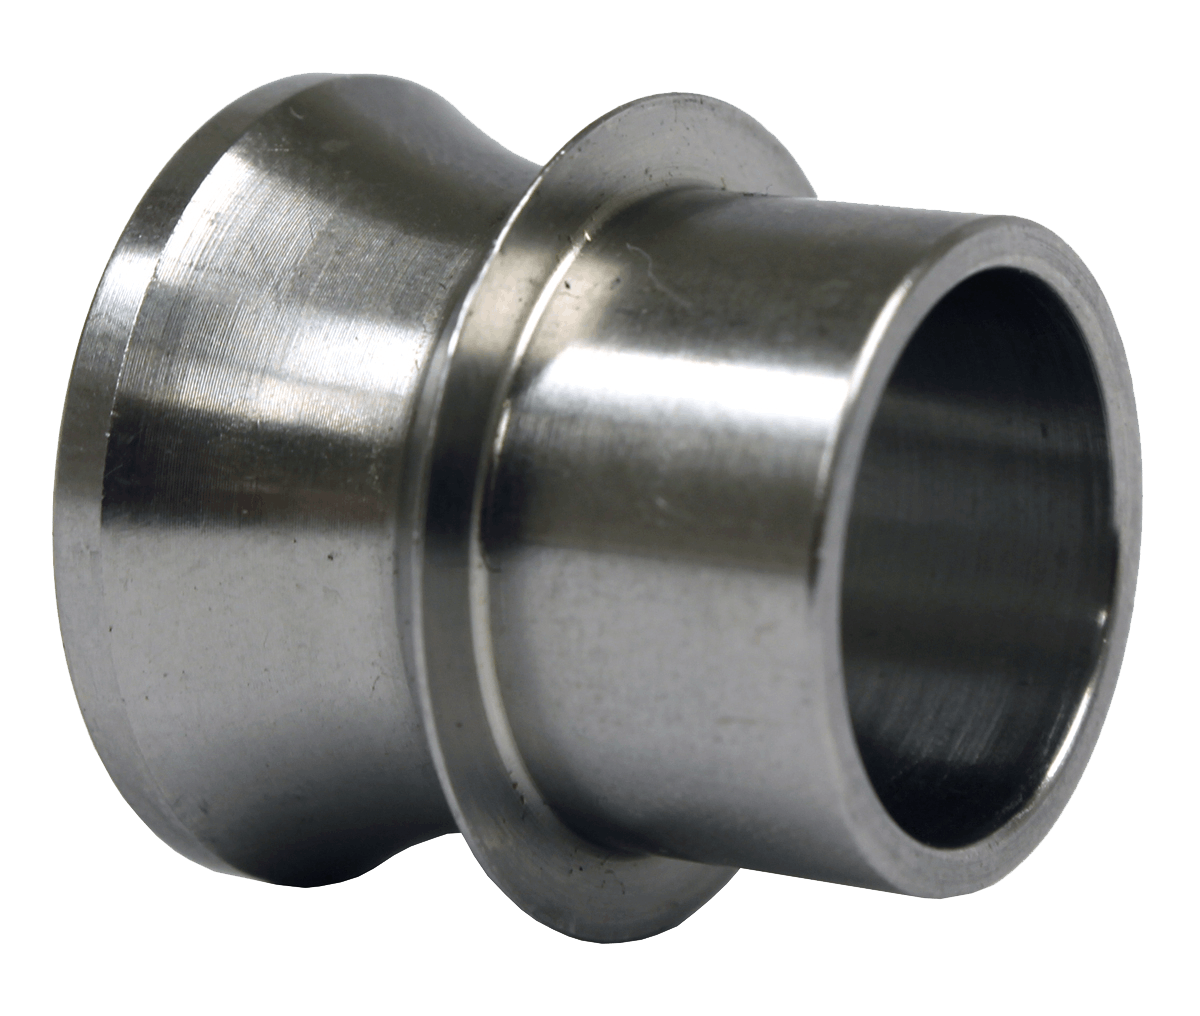 QA1 SG16-1010 High Misalignment Spacer, 1 inch Od Ss, .625 inch X 2.625 Total Width